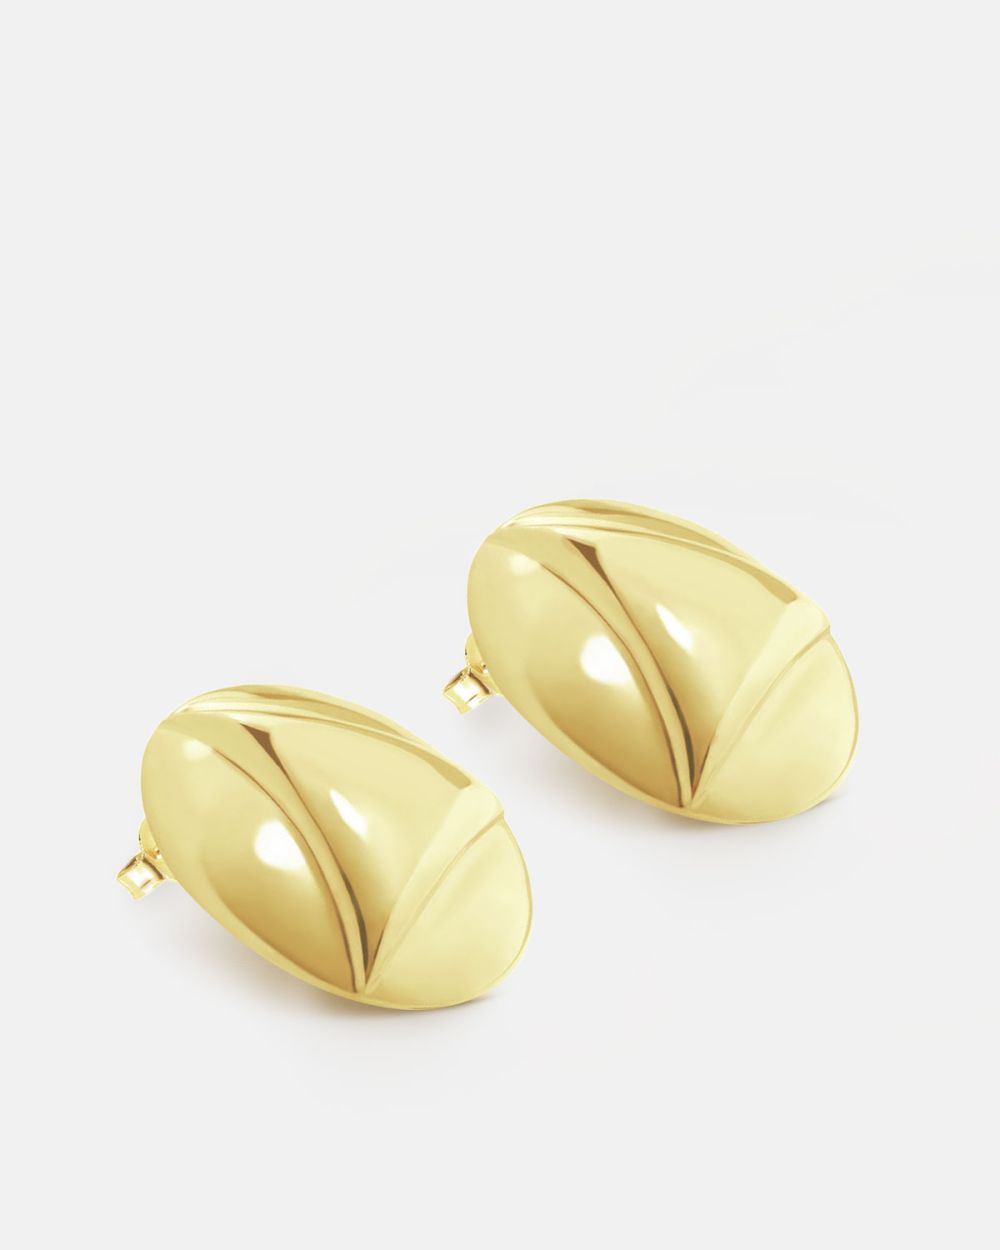 Edges Earrings in Gold Plated Silver